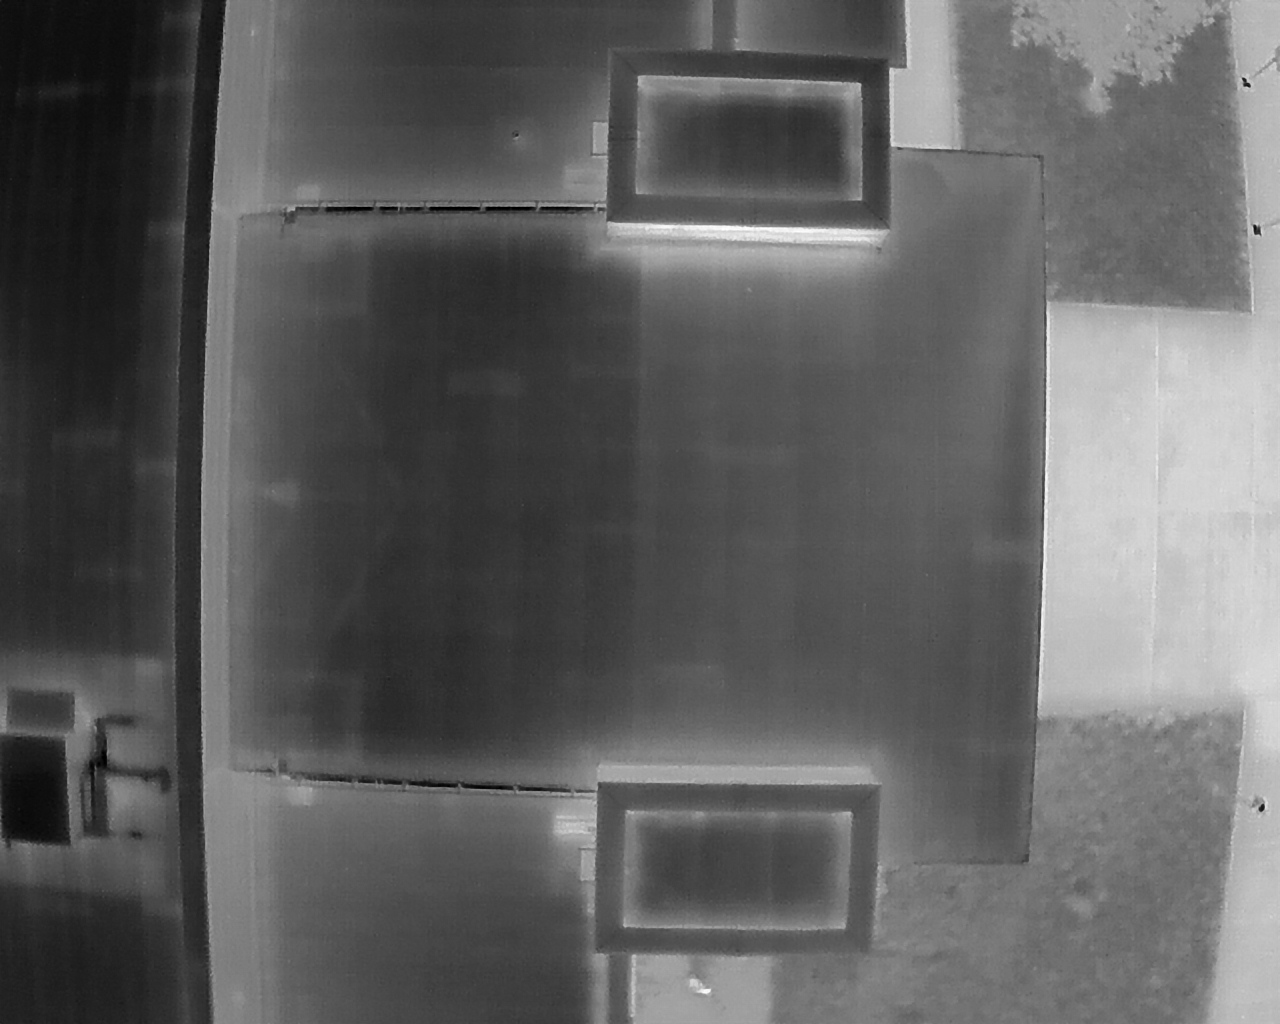 This image showcases what a thermal image looks like in a thermal roof inspection application.